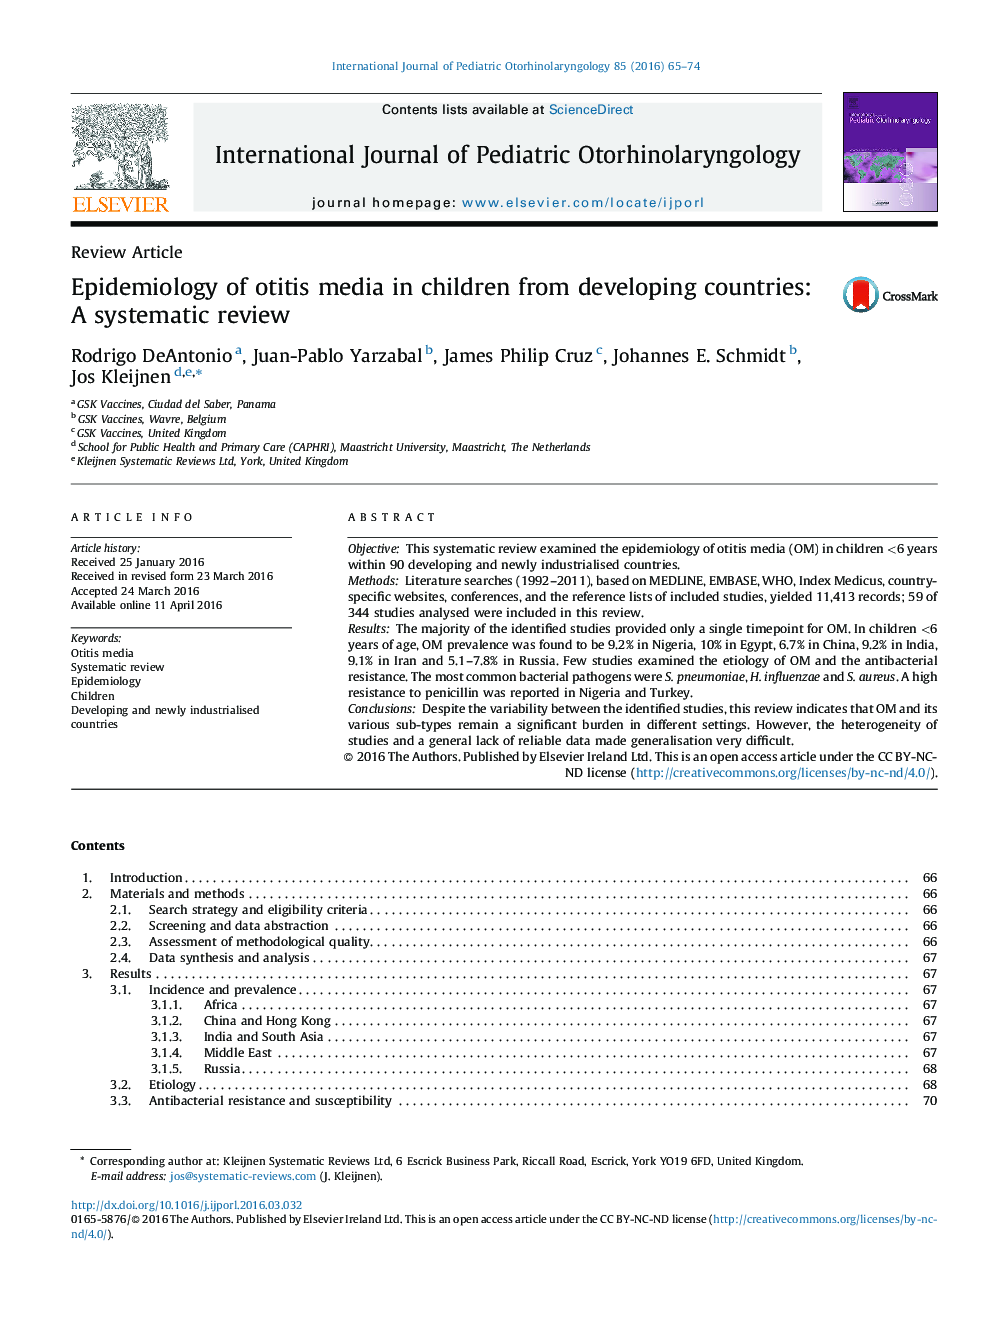 Epidemiology of otitis media in children from developing countries: A systematic review